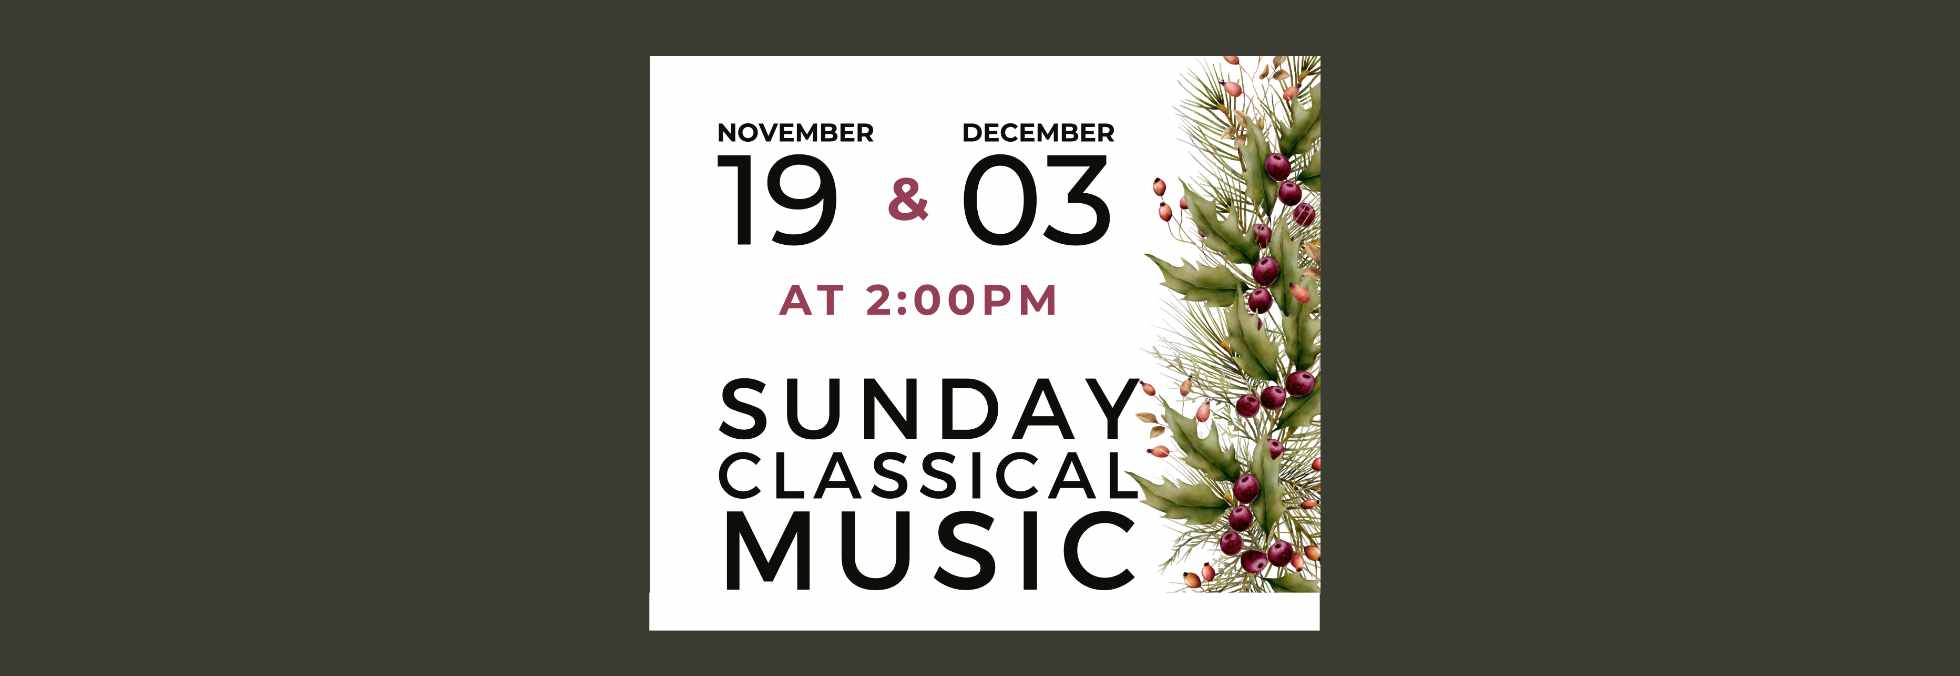 Sunday Classical Music at St. Andrew's on Nov 19 and Dec 3